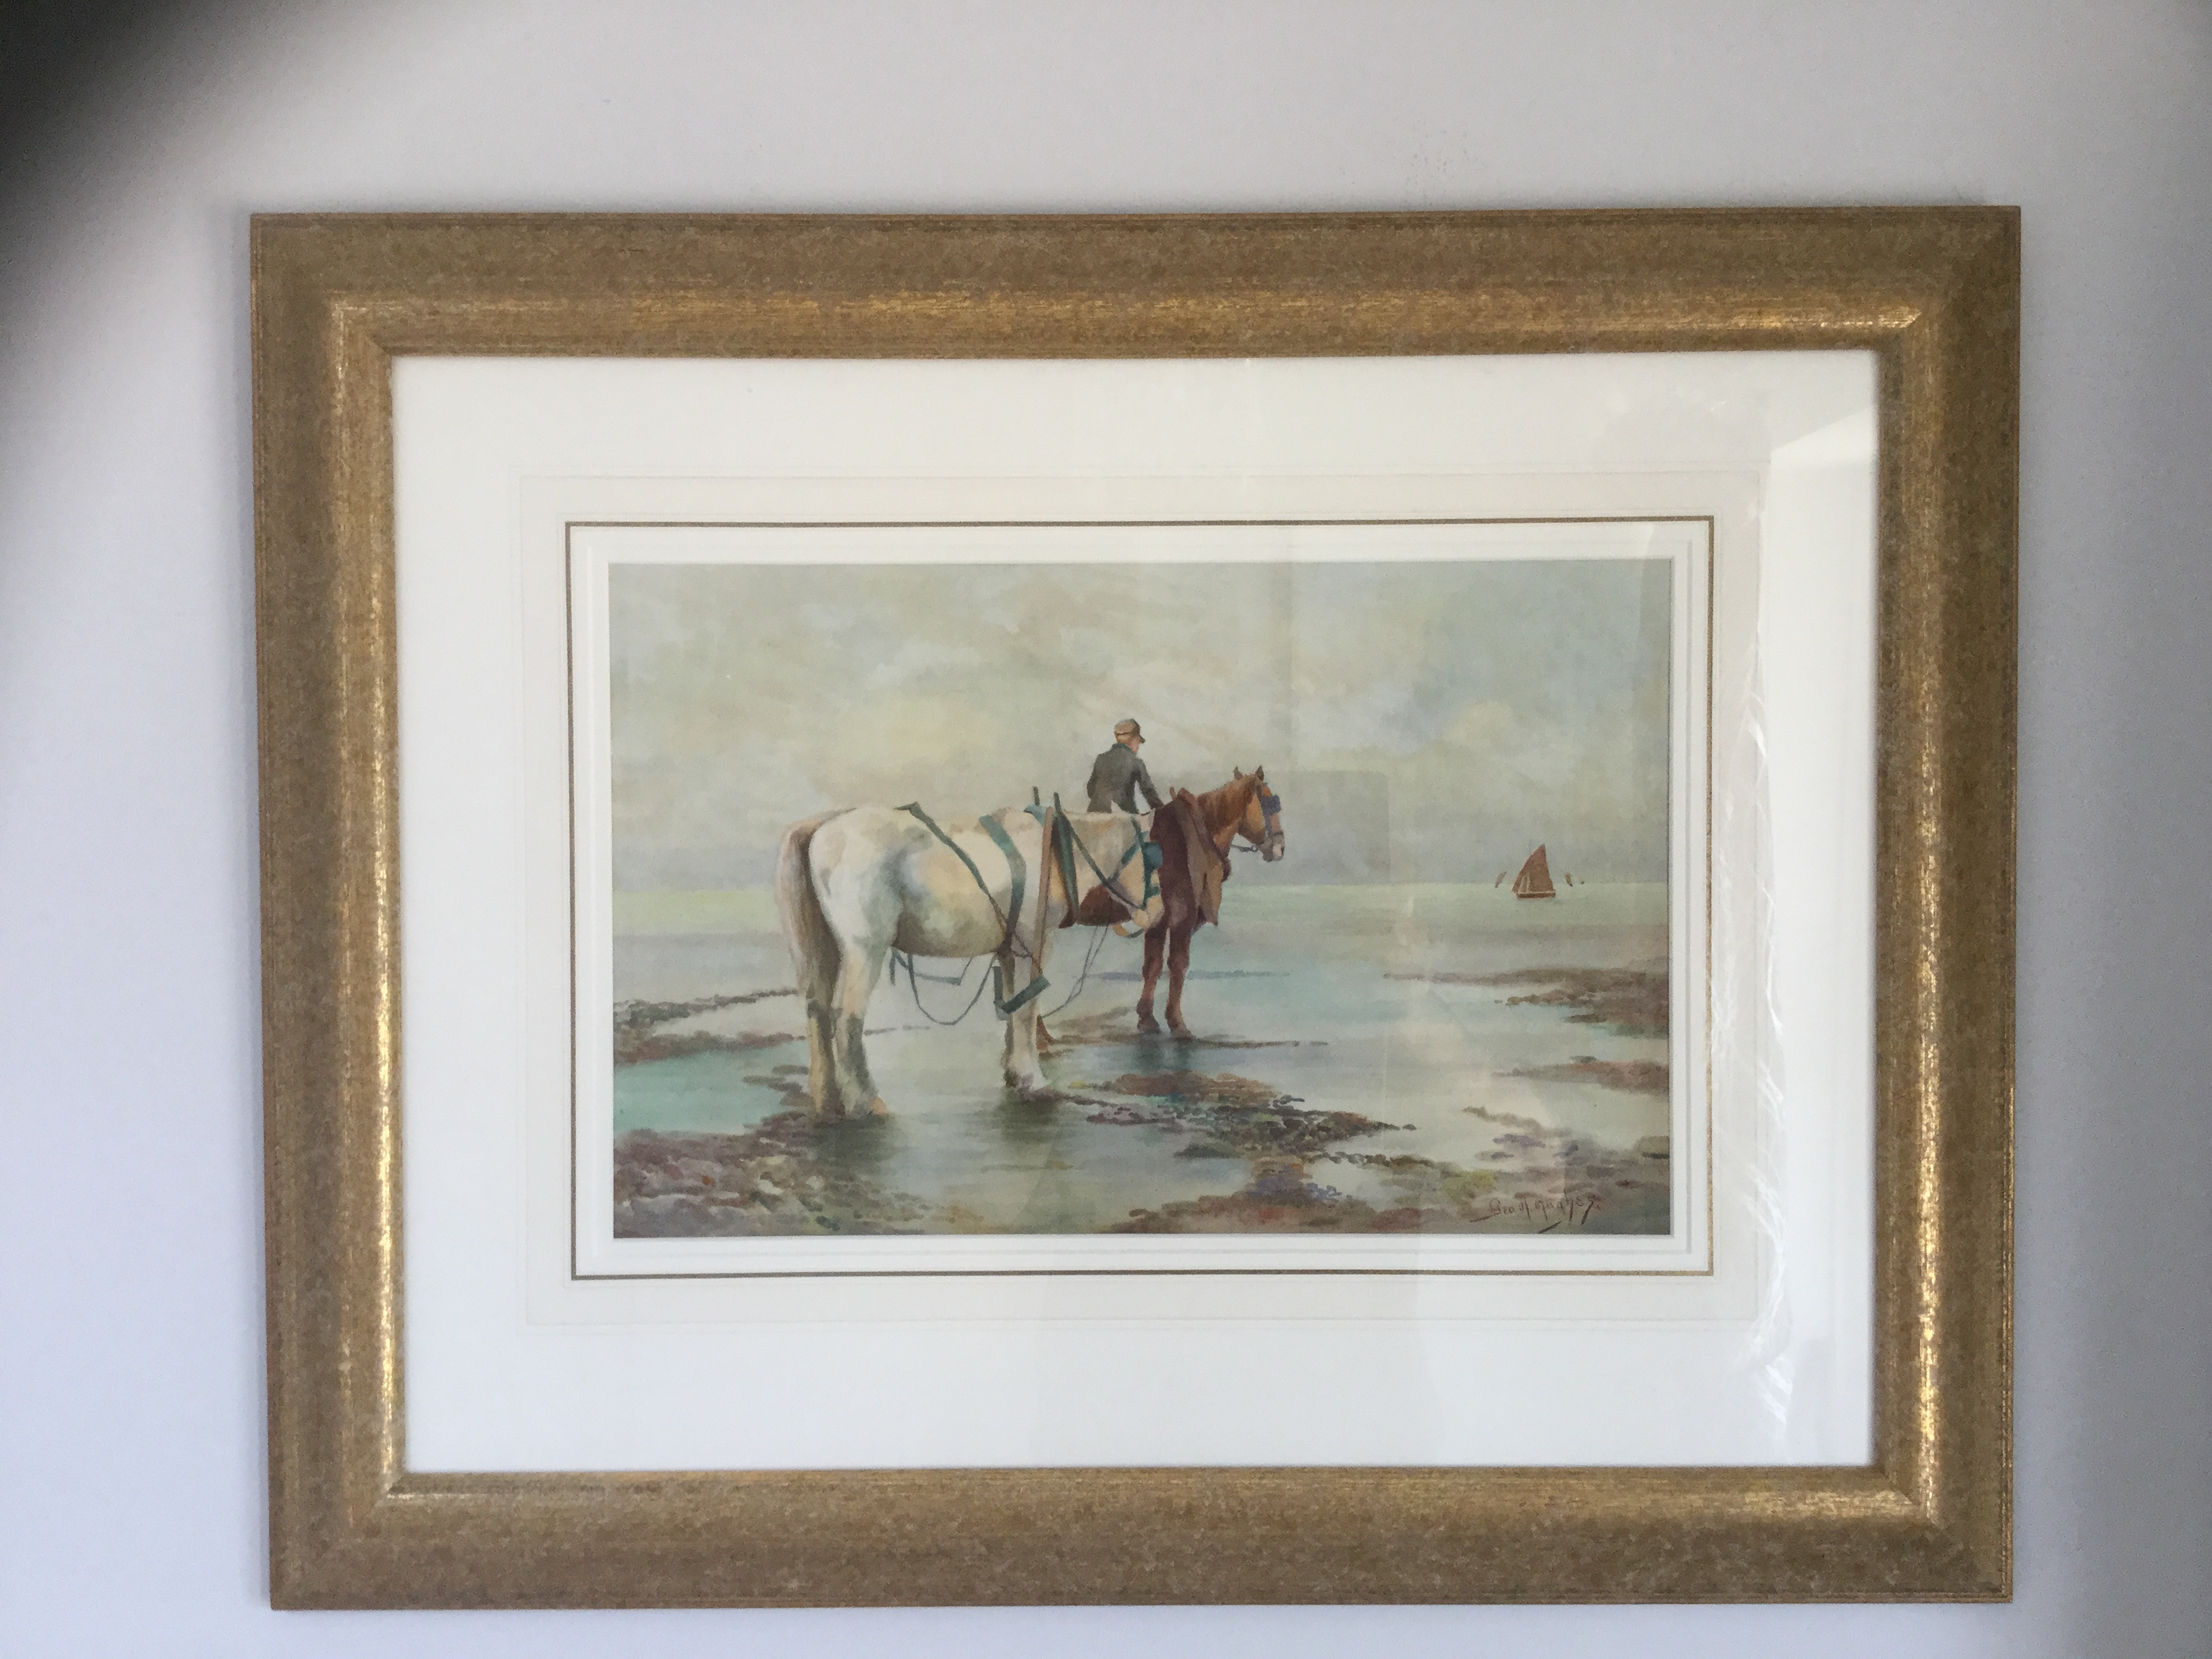 Horses by the beach by George H Hughes, 